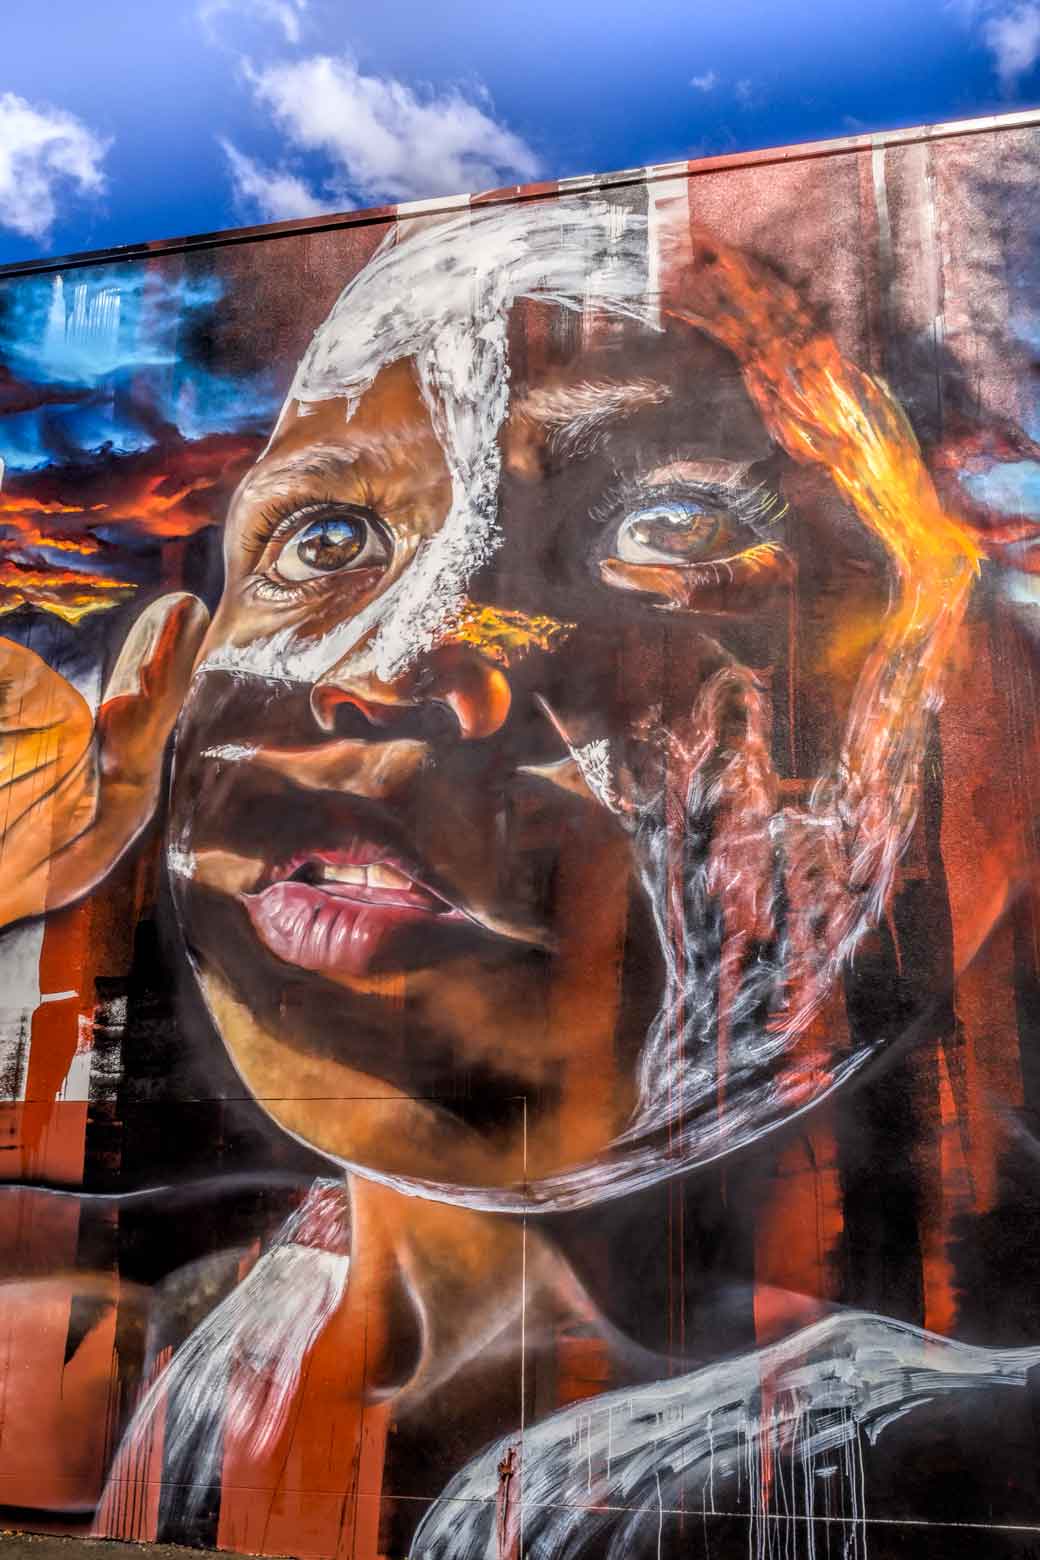 Street art mural of young boys face by Adnate in Toowoomba